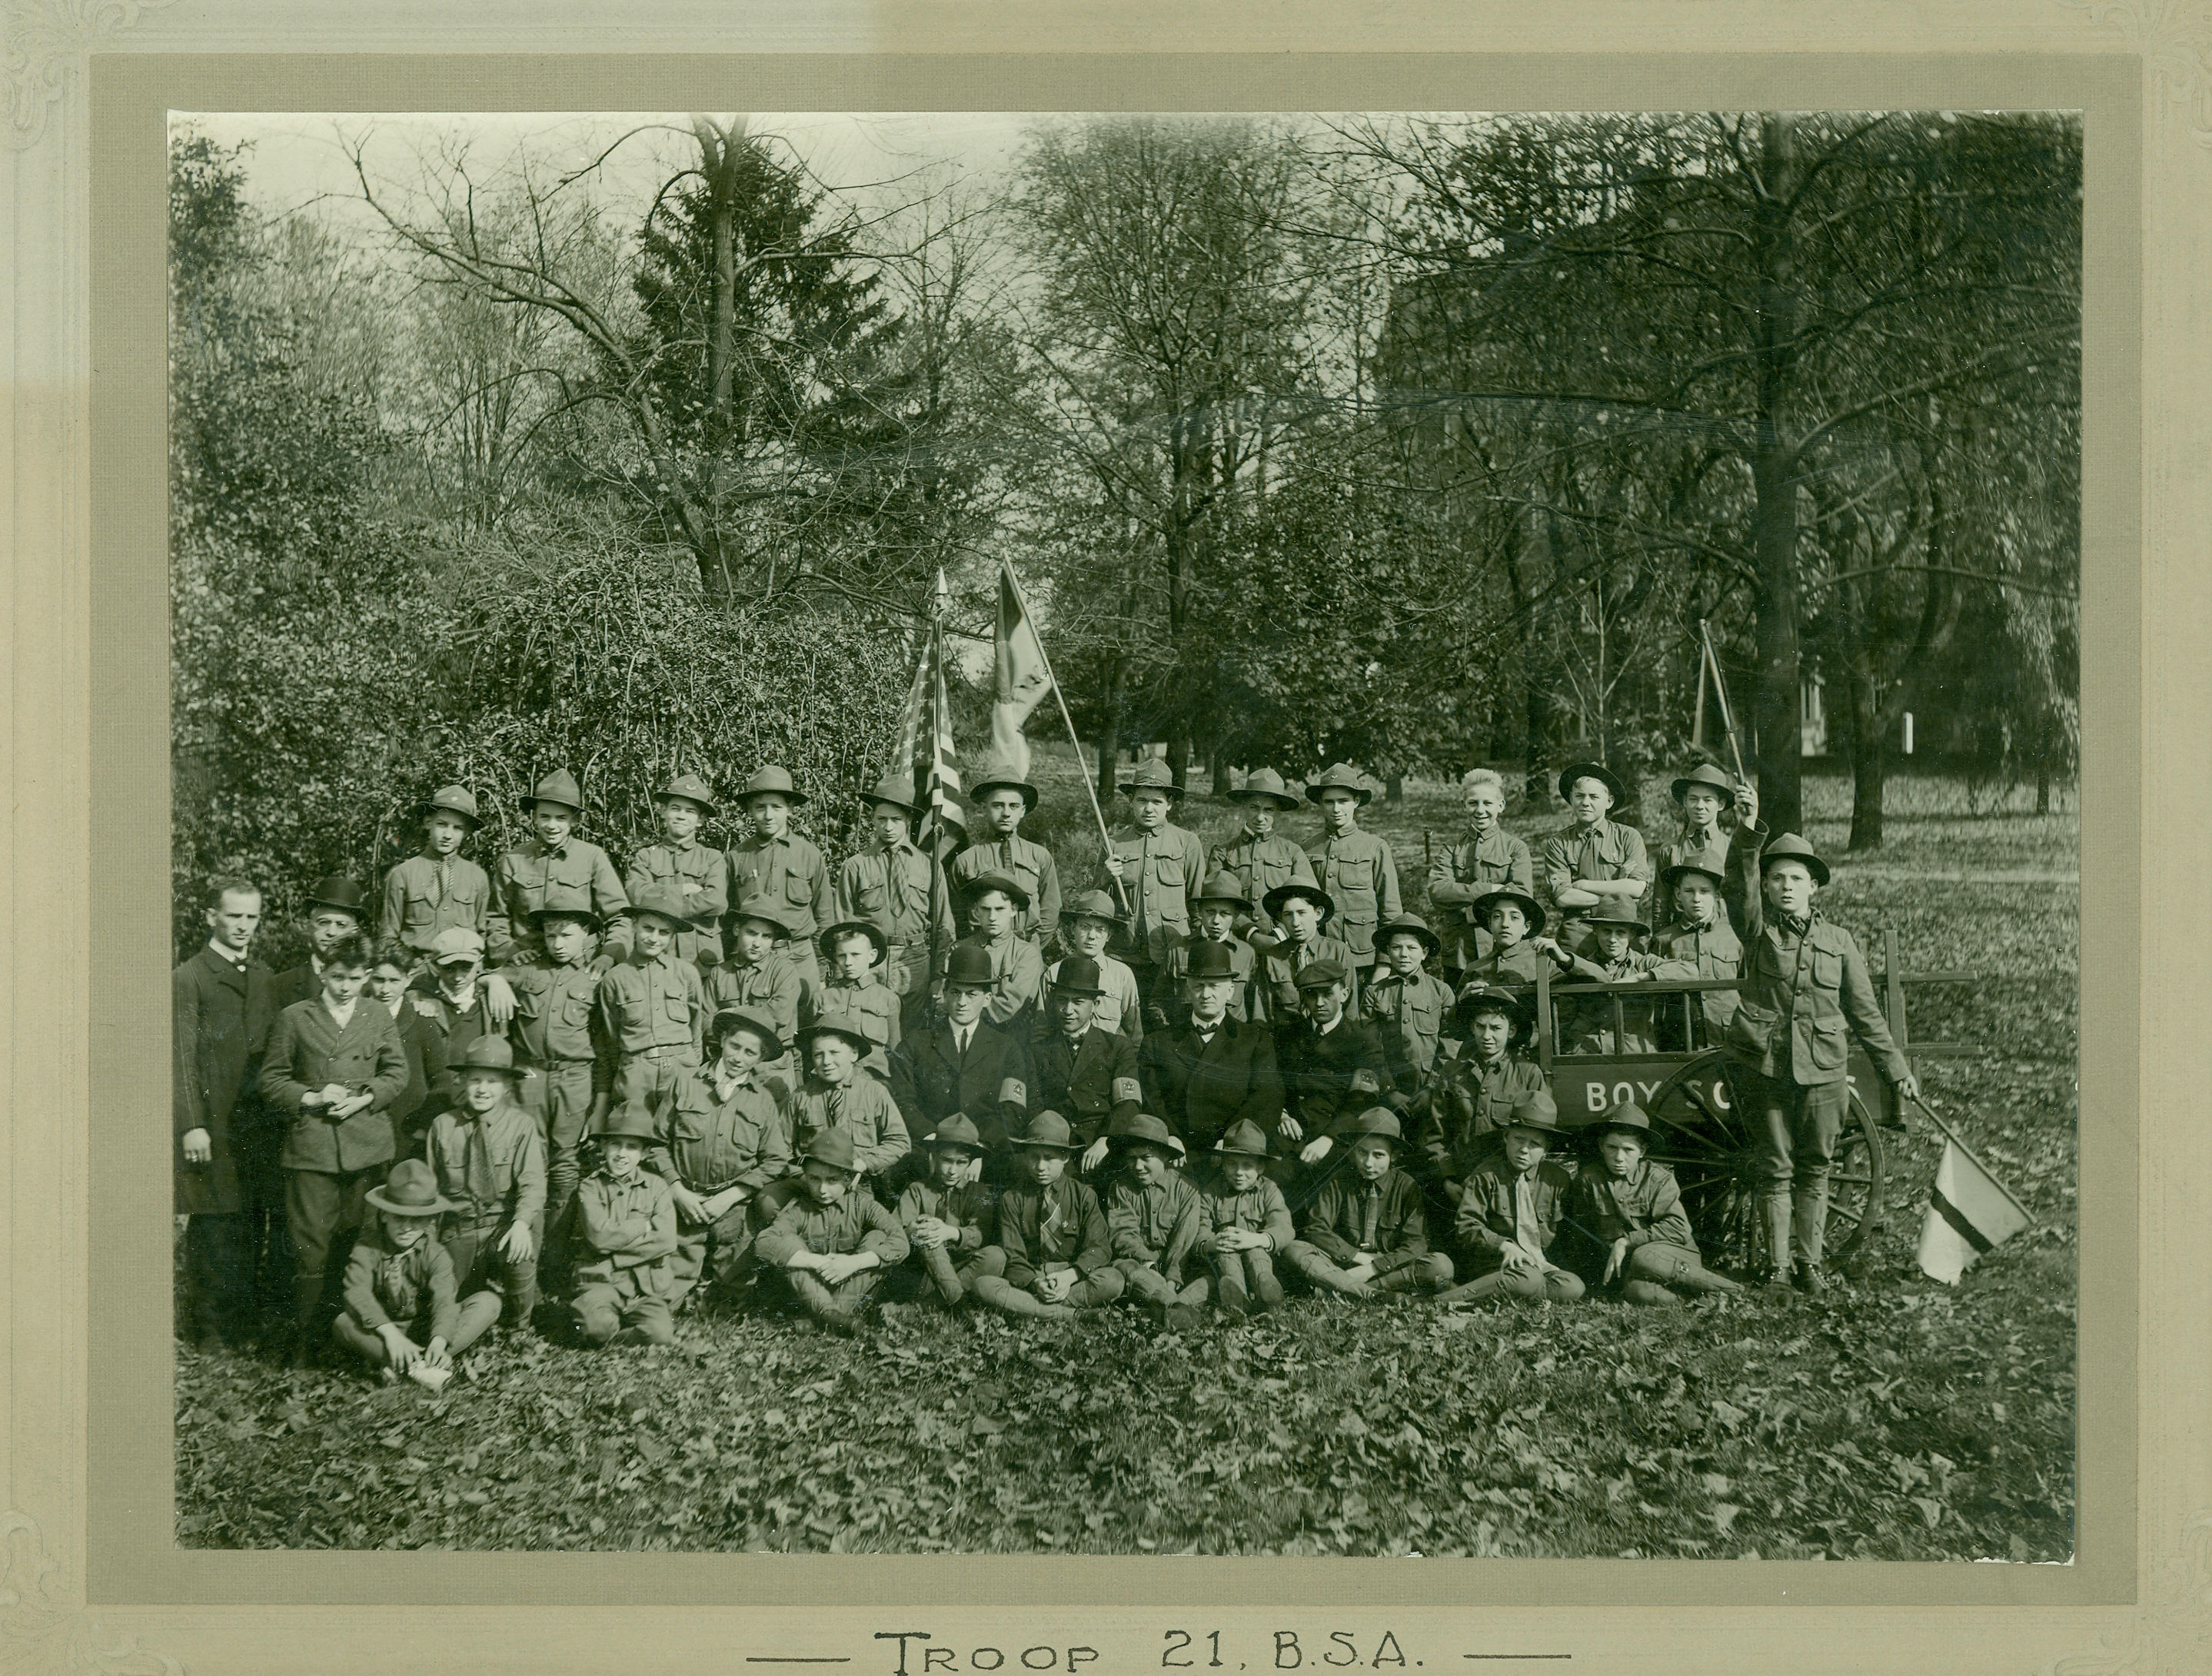 St. Mary’s Institute Boy Scout Troop 21 is pictured on November 14, 1917 on the grounds of the campus. Photo from University Archives.